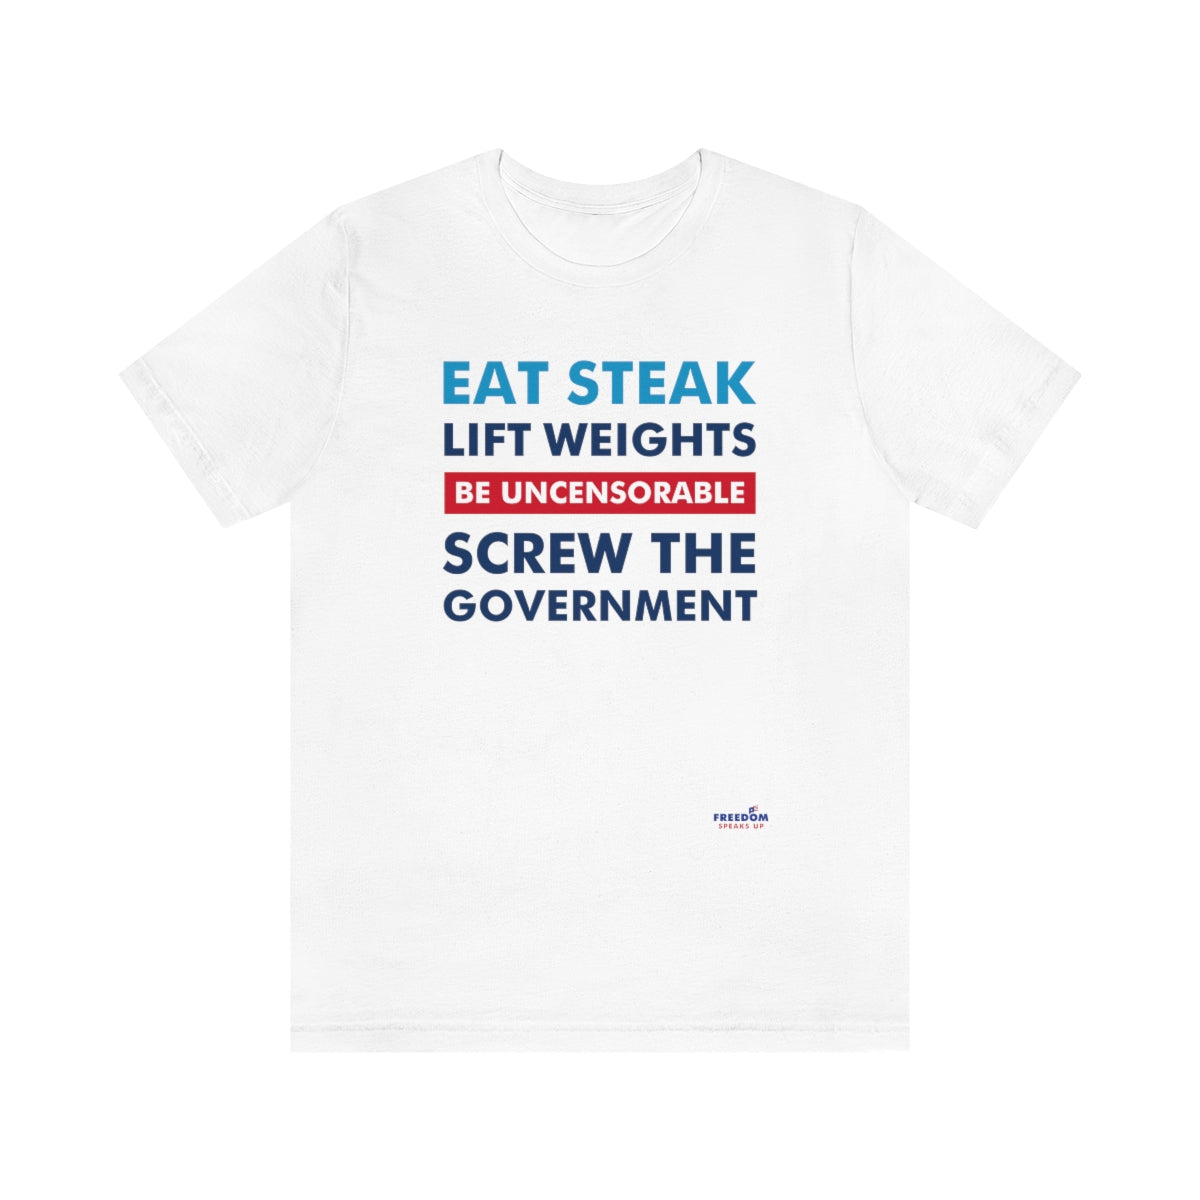 Eat Steak. Lift Weights. Be Uncensorable. Screw the Government. T-Shirt White XS 